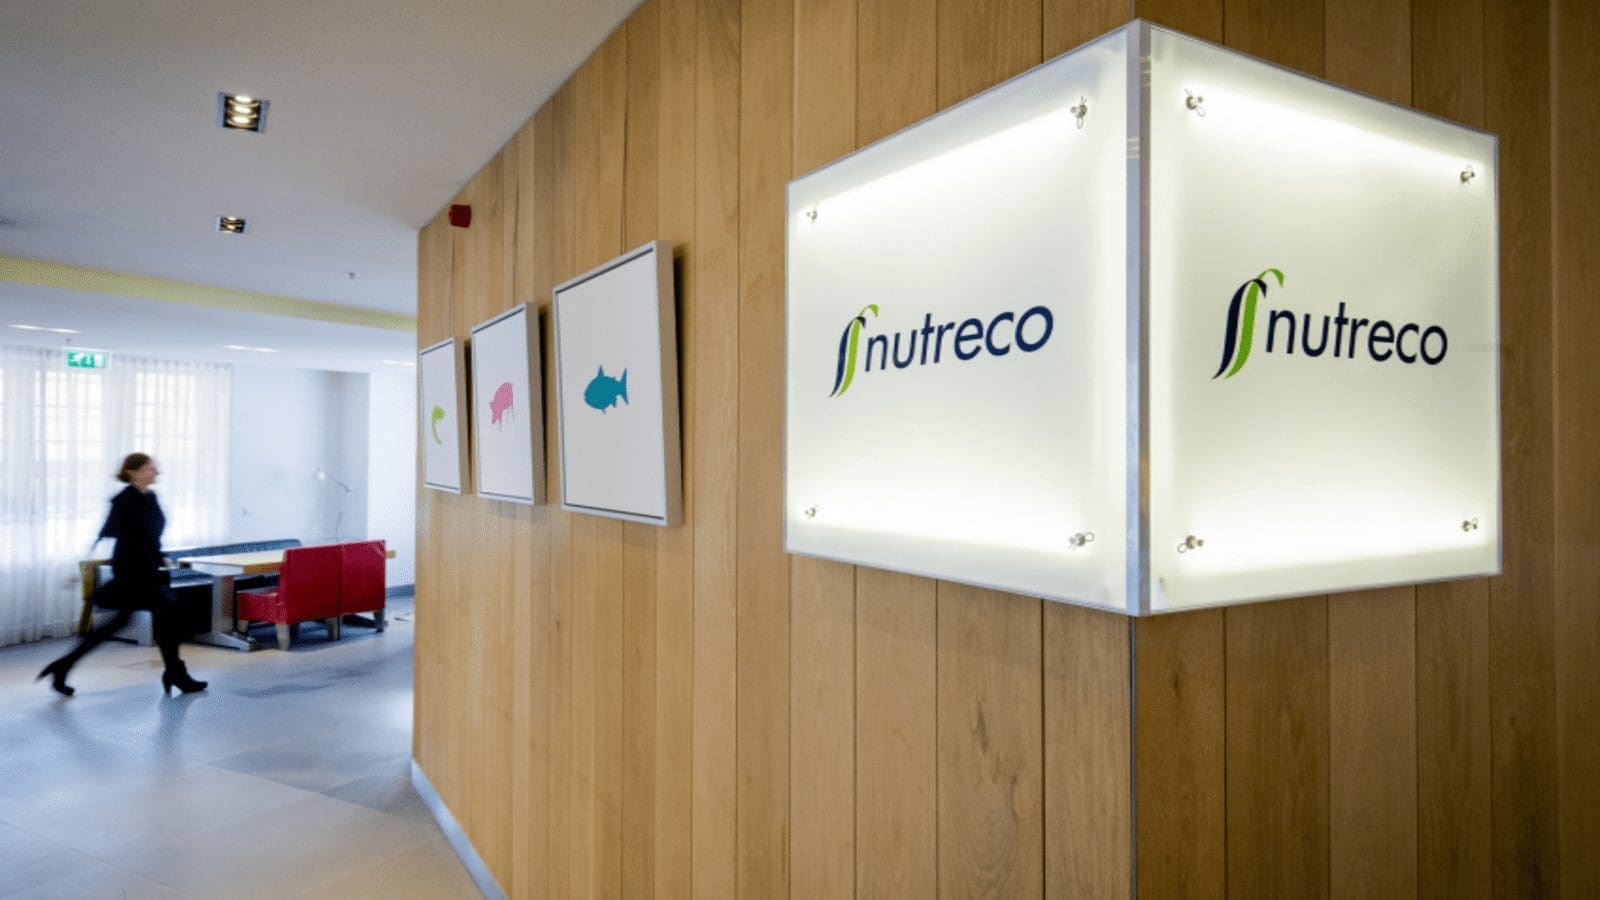 Nutreco receives US$4.8m grant to establish feed mills in hard-to-reach communities in Africa